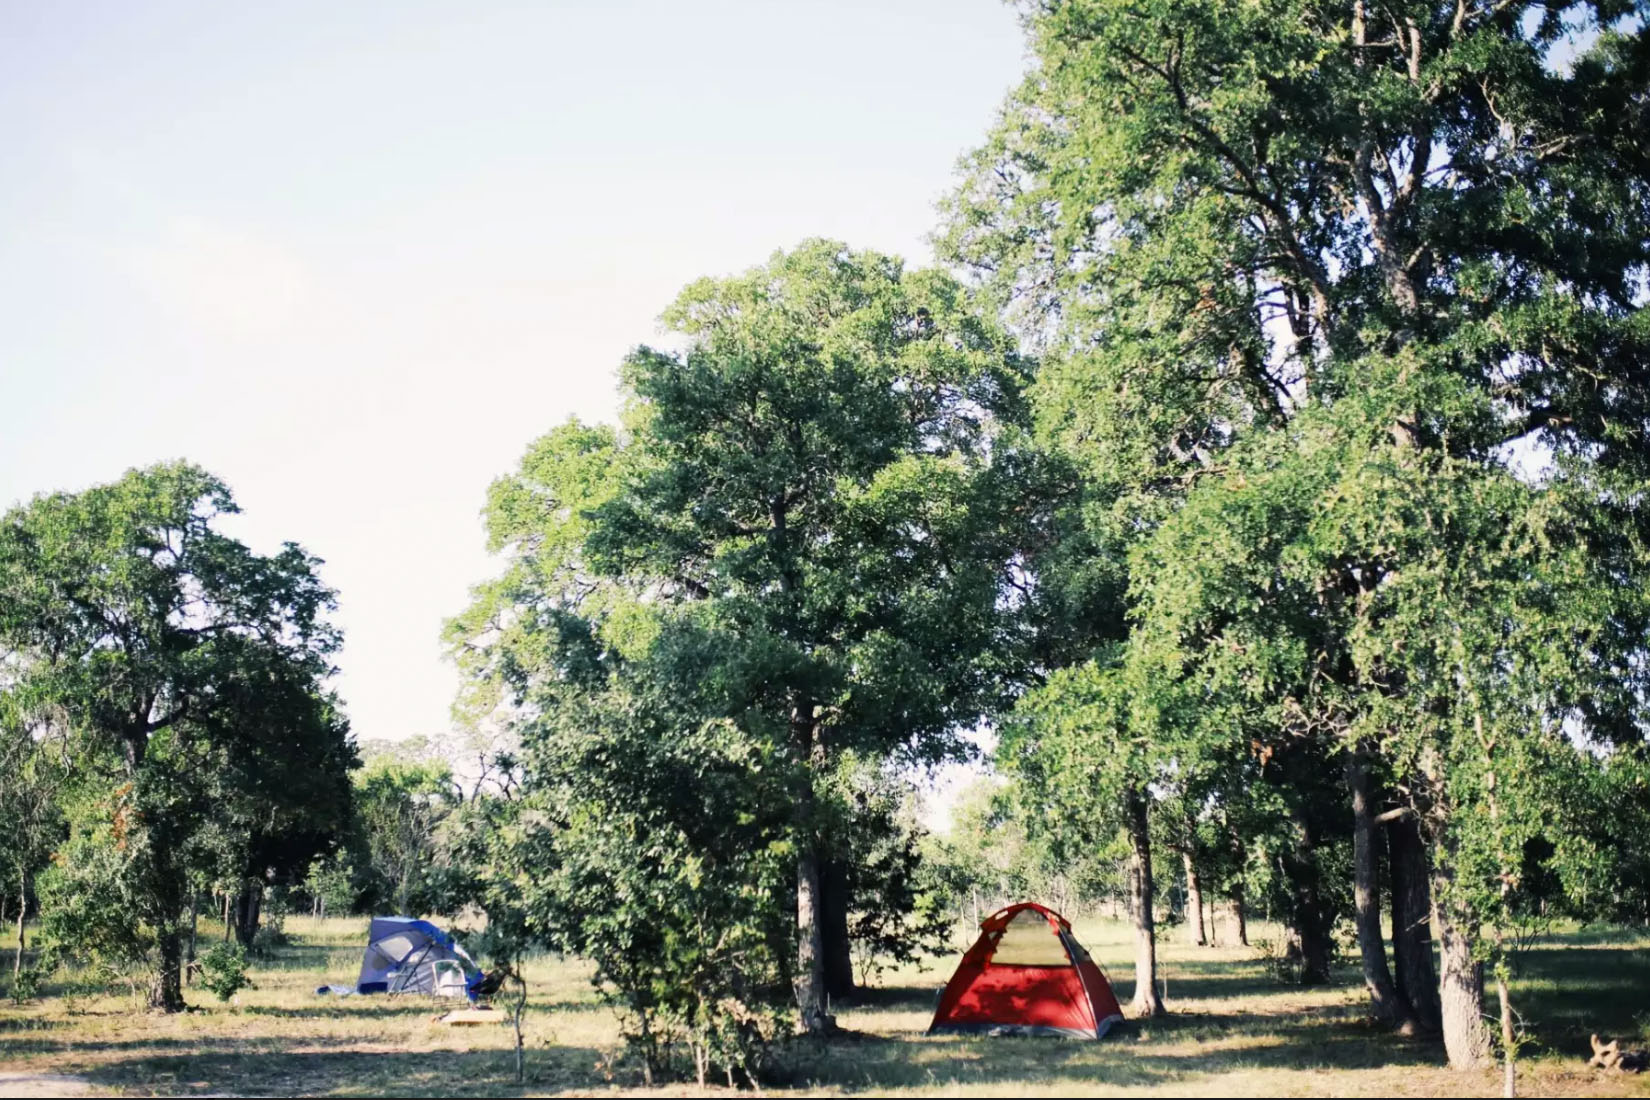 Al 'S Hideaway oferuje tani kemping w Teksasie za 25 USD's Hideaway offers low-cost camping in Texas for $25